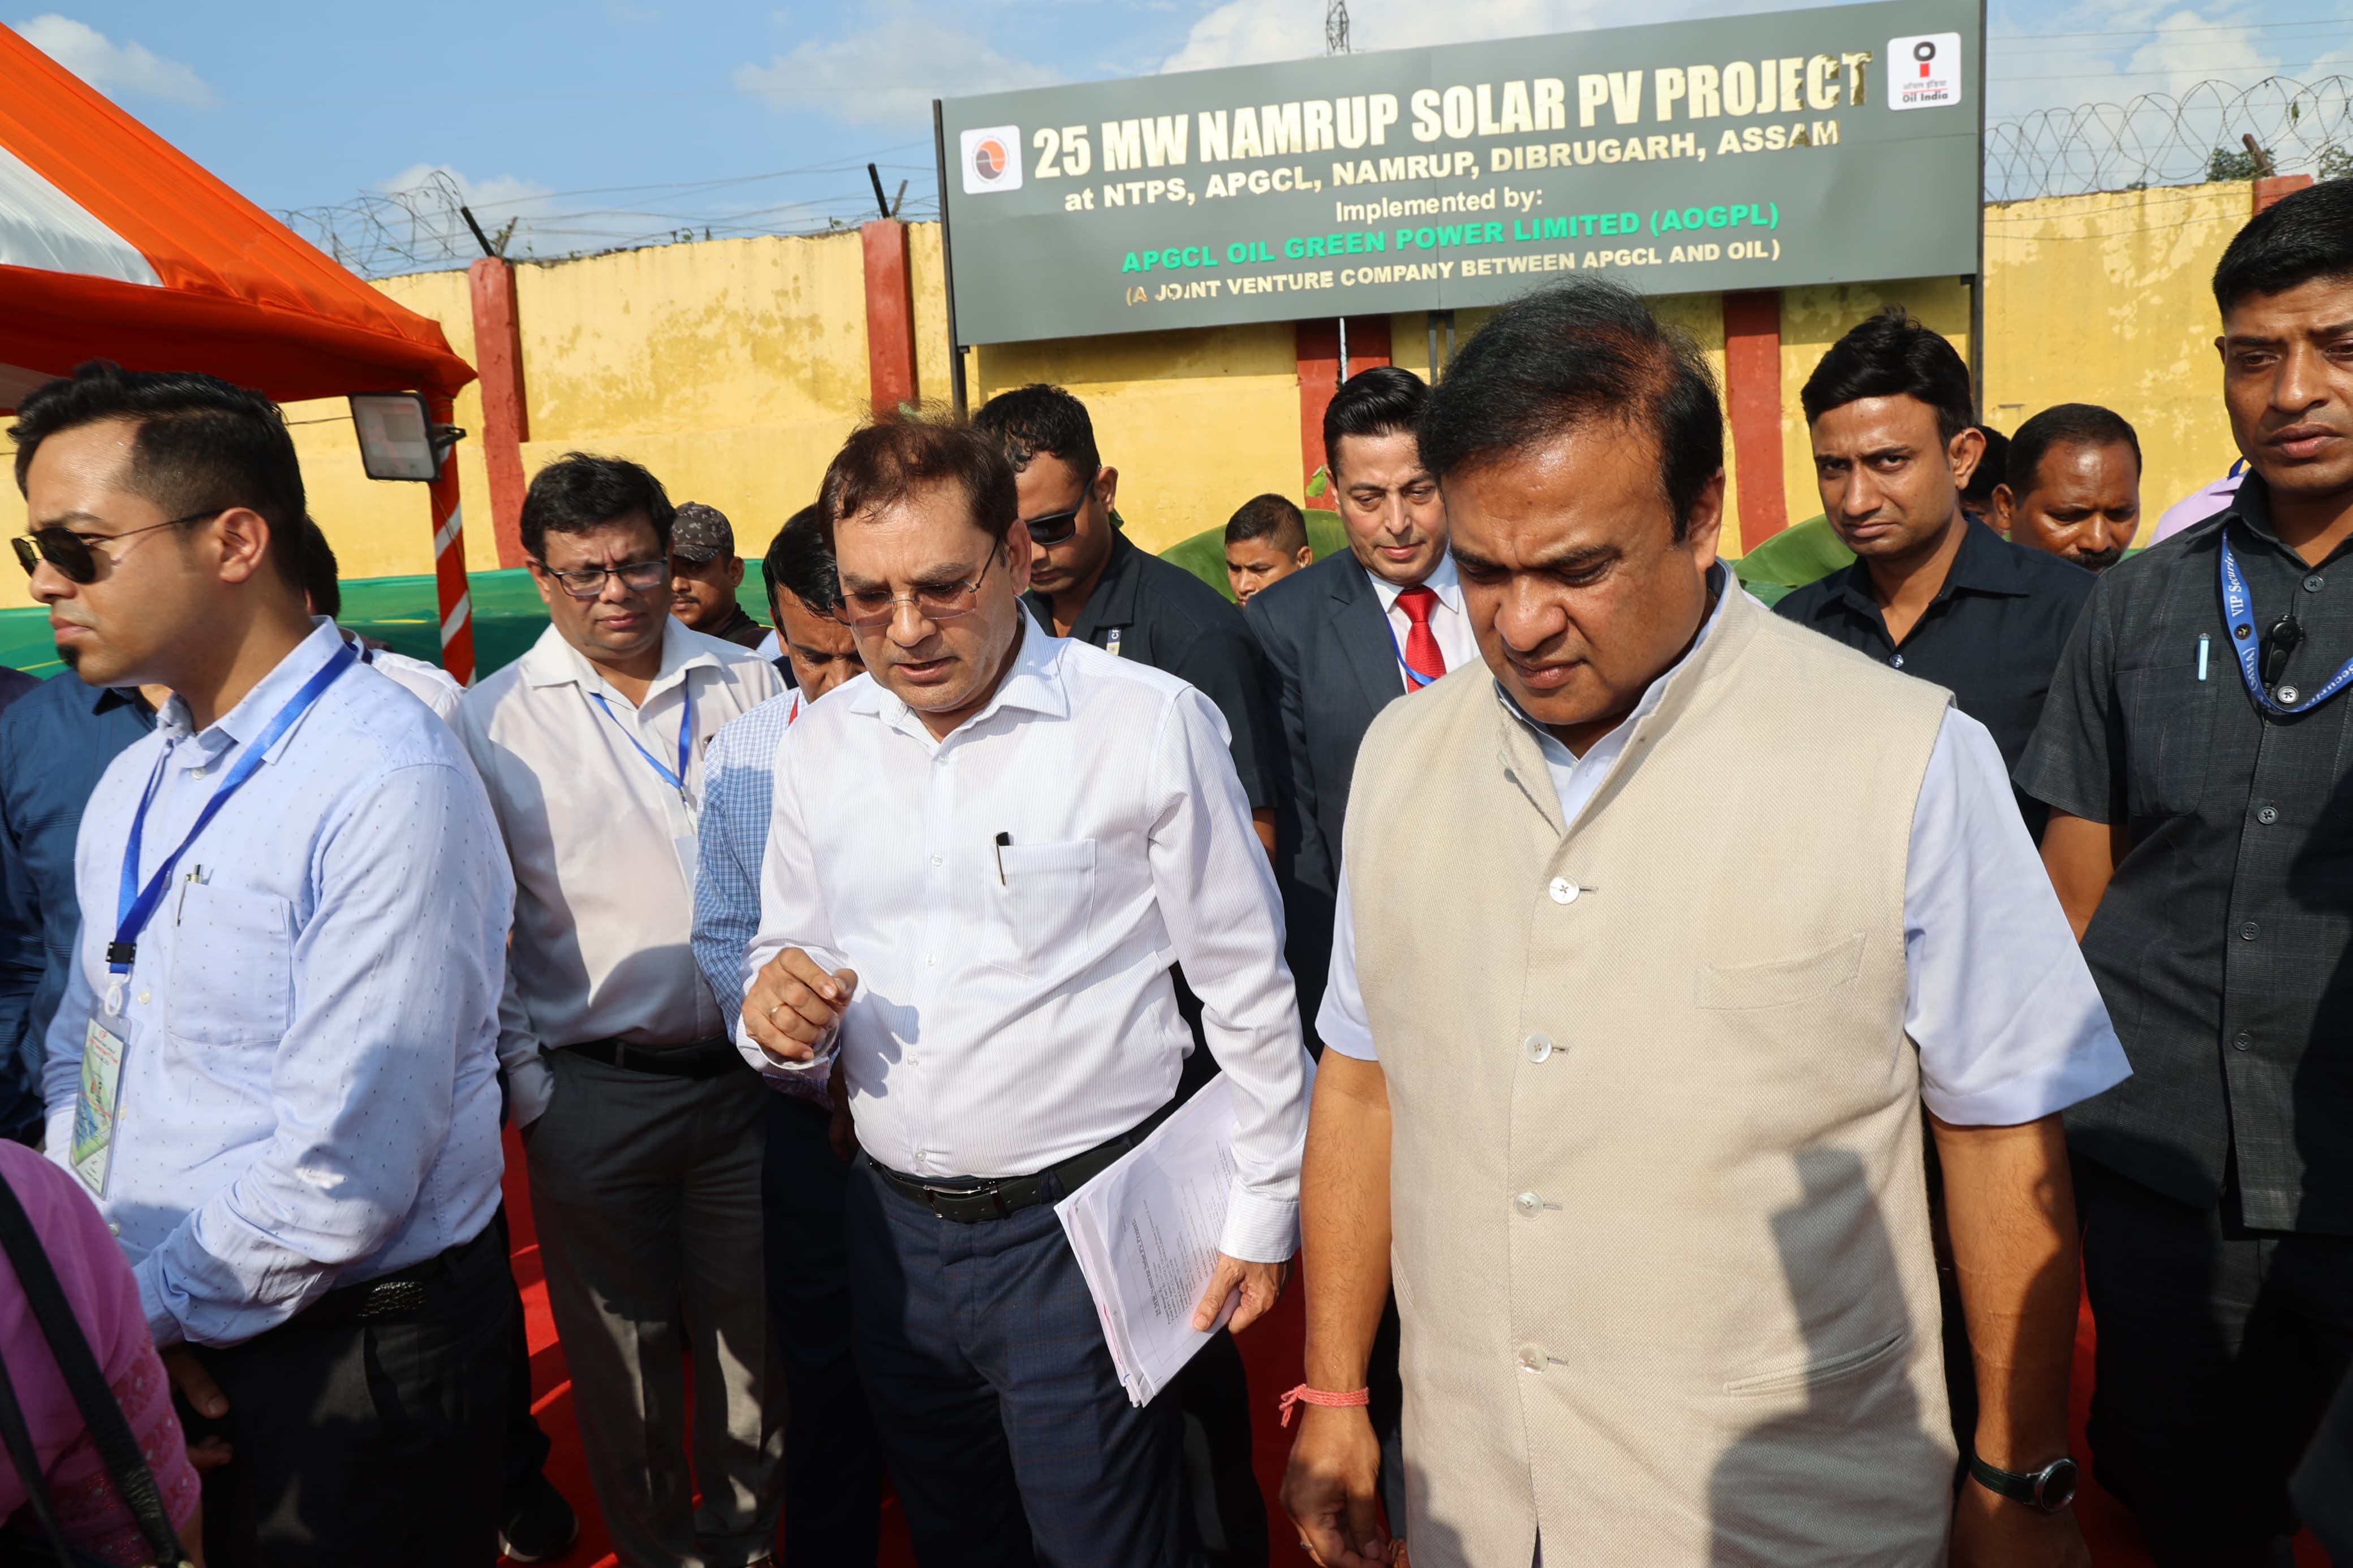 Laid the foundation stone of a 25MW Solar Power Plant at Namrup in Dibrugarh today